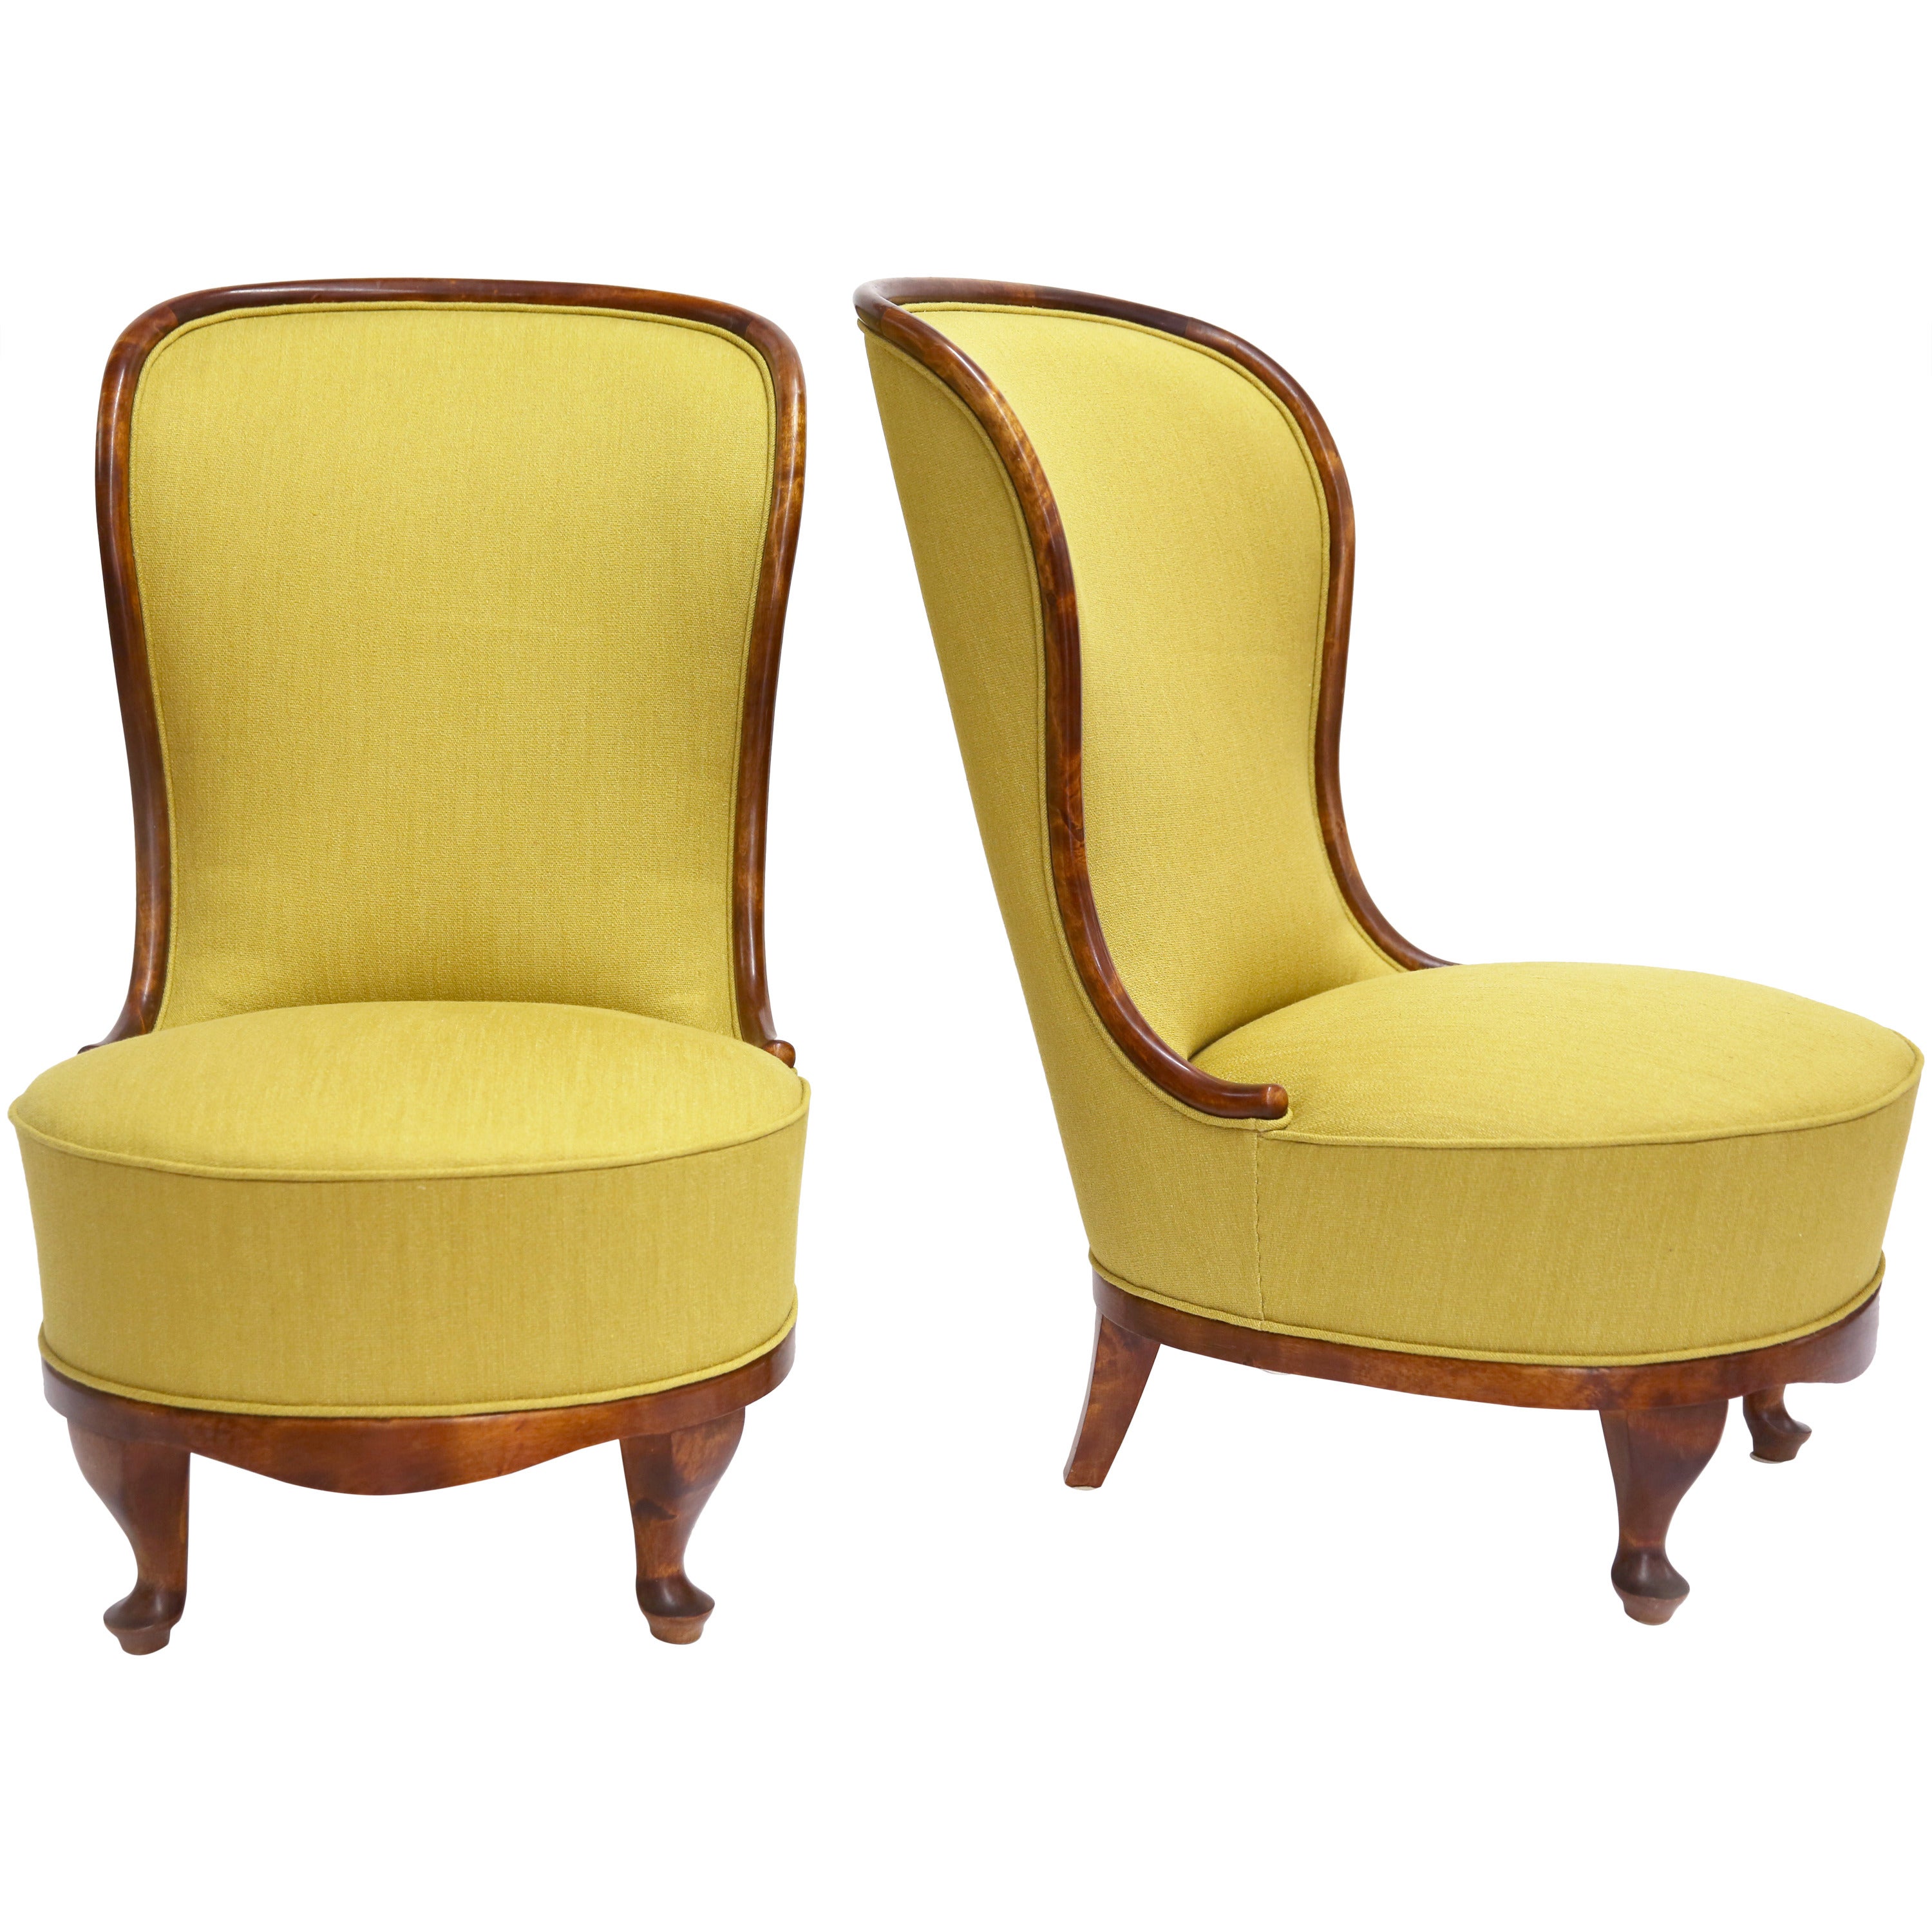 Pair of Slipper Chairs by Tor Wolfenstein, Early 1940s For Sale